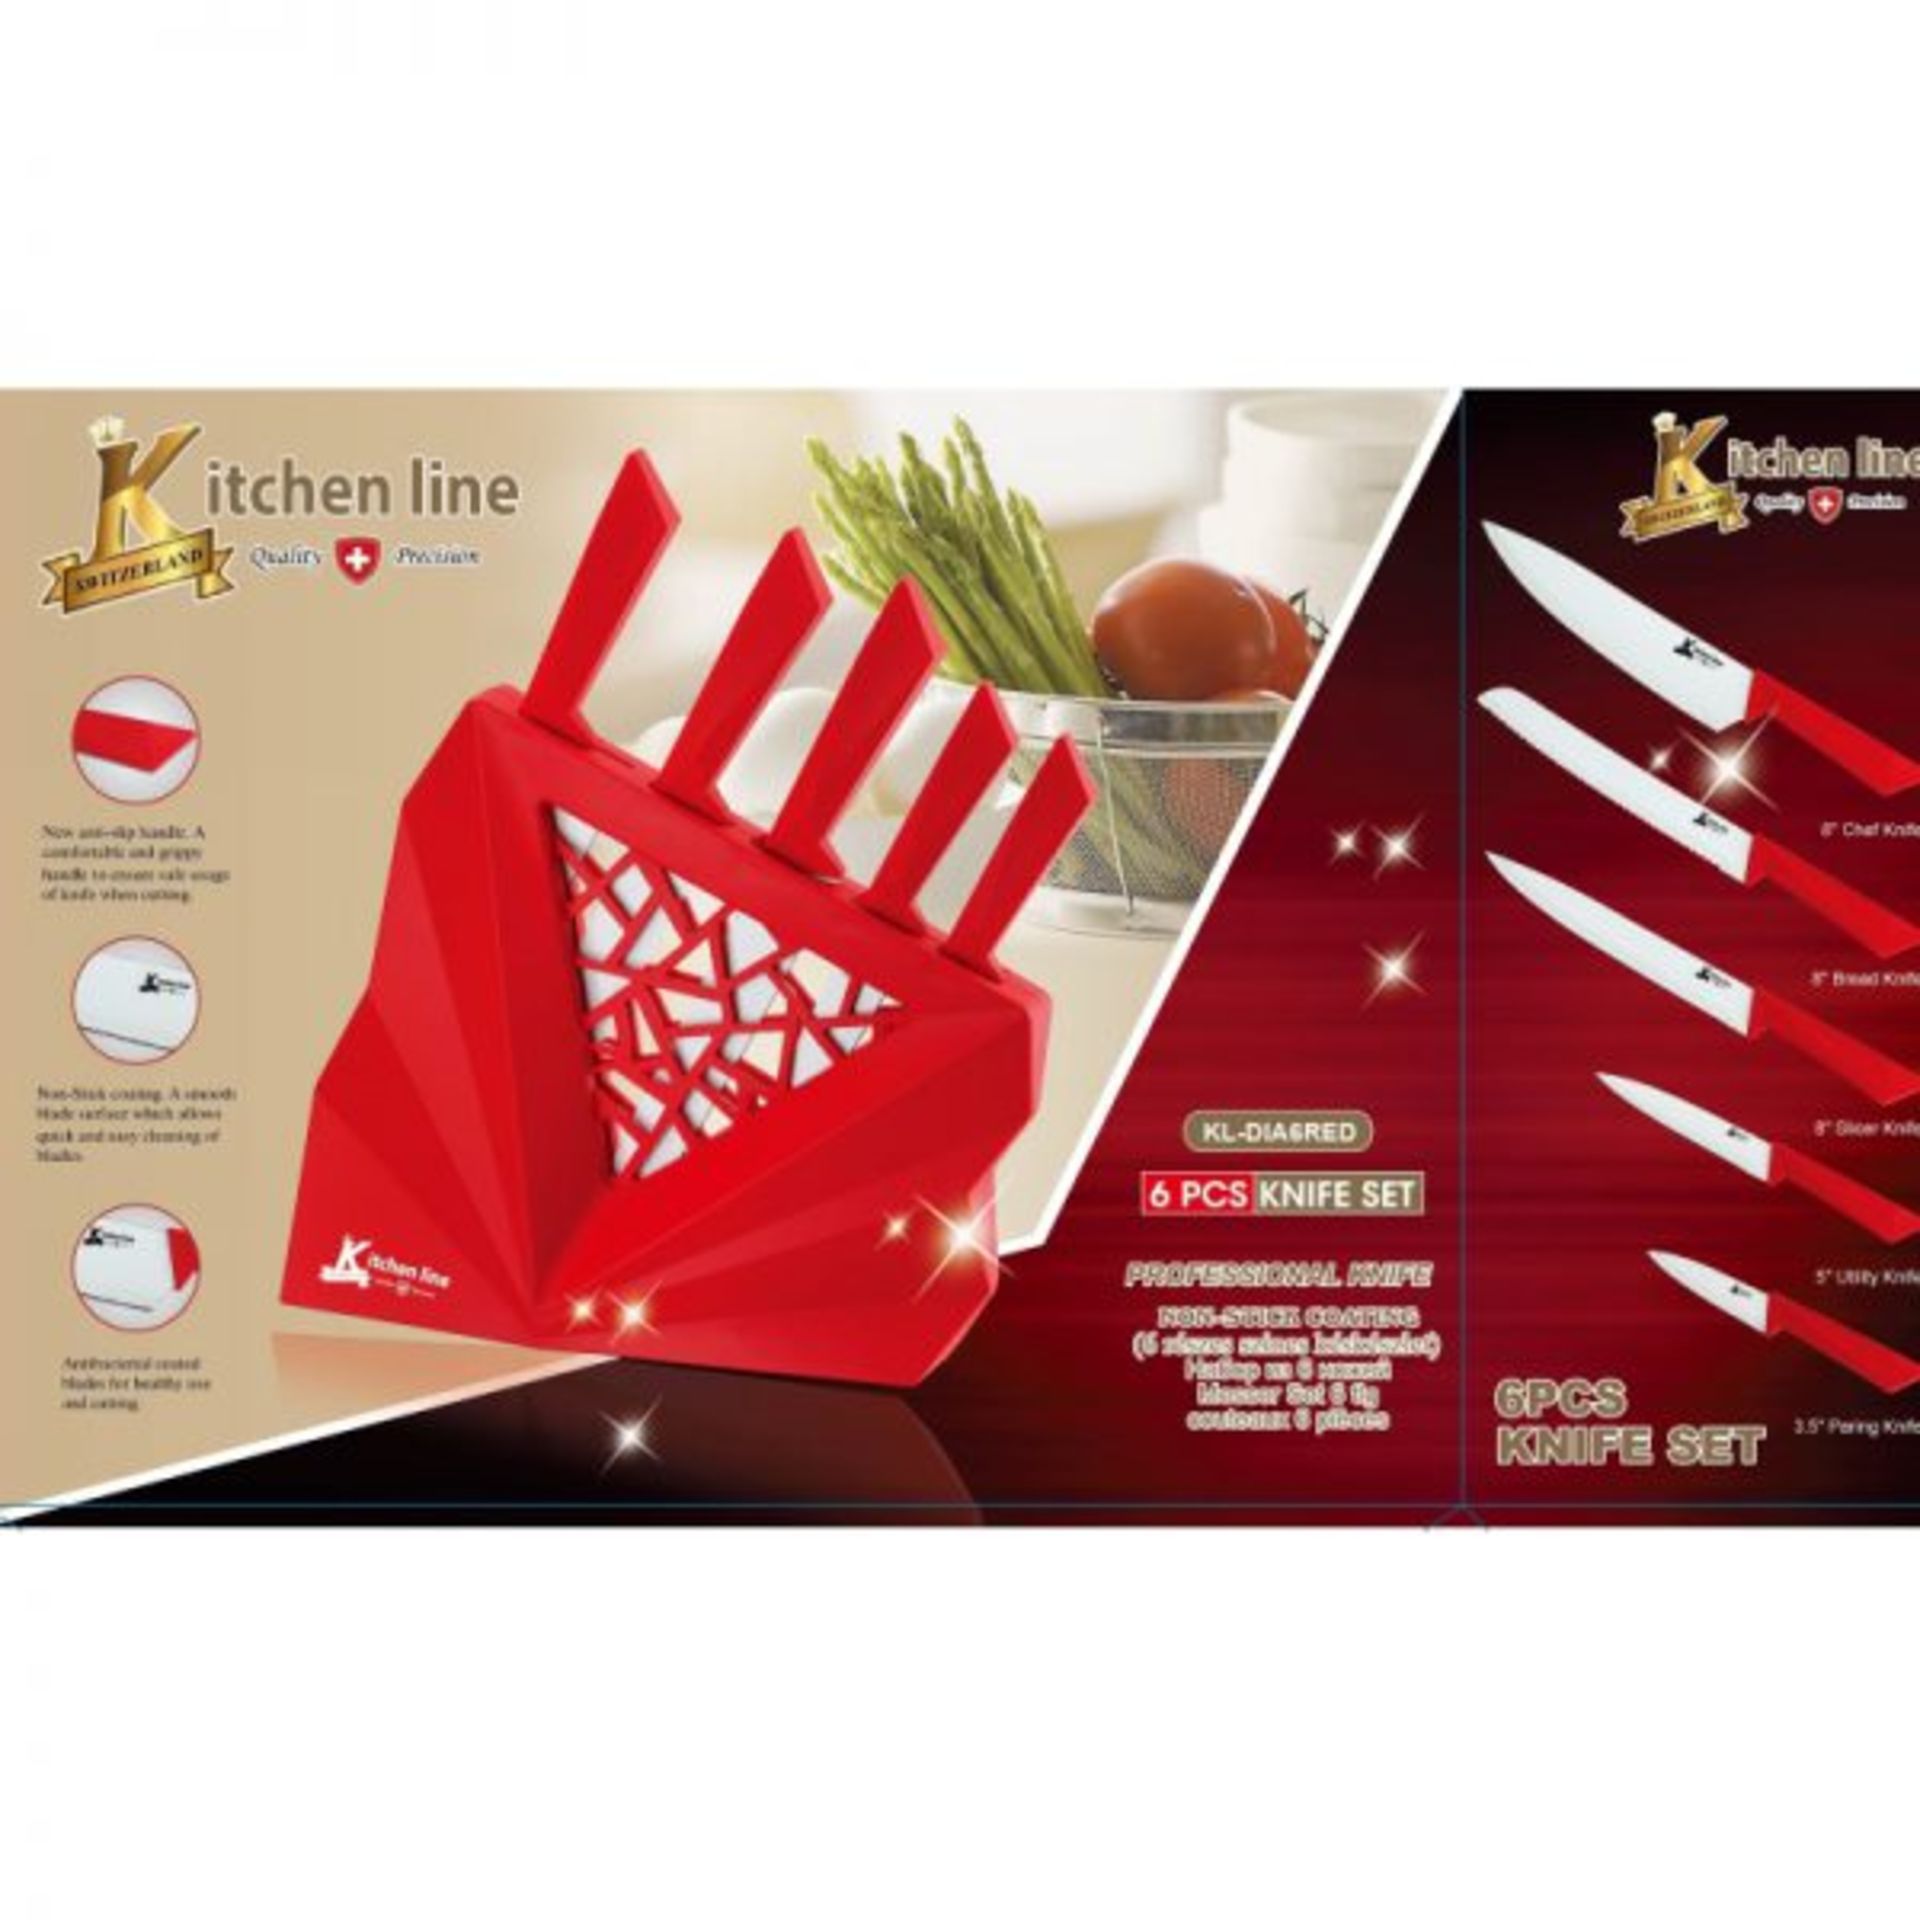 V *TRADE QTY* Brand New Kitchen Line Switzerland 6 Piece Knife Set With Includes 8" Chef Knife/8"